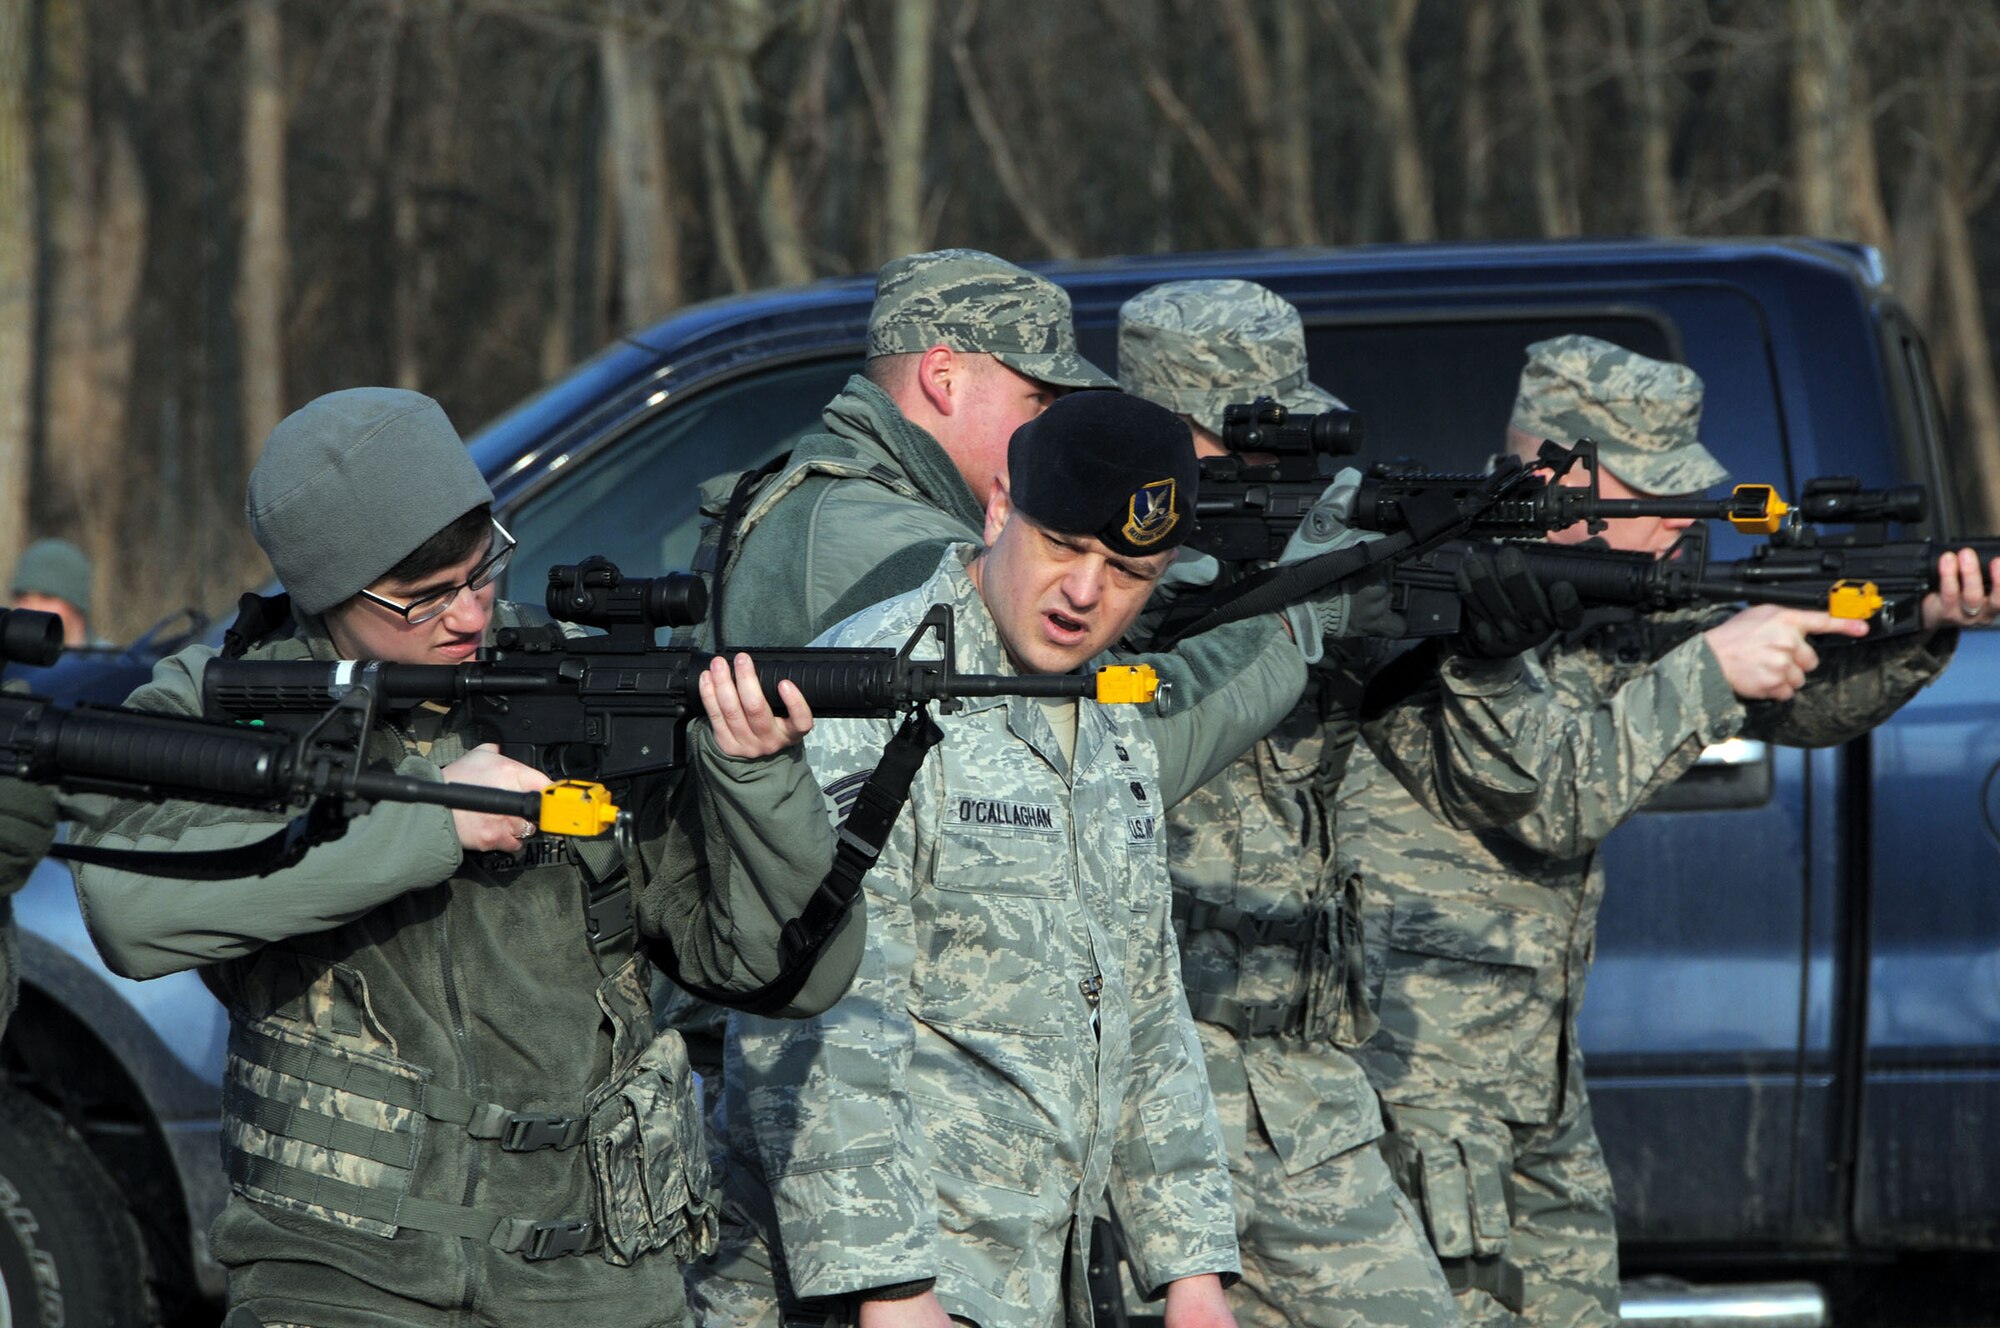 WRIGHT-PATTERSON AIR FORCE BASE, Ohio - Staff Sgt. Michael O’Callaghan, 445th Security Forces Squadron course instructor, provides guidance during the unit’s “shoot, move, communicate” training event March 9. (U.S. Air Force photo/Tech. Sgt. Anthony Springer)